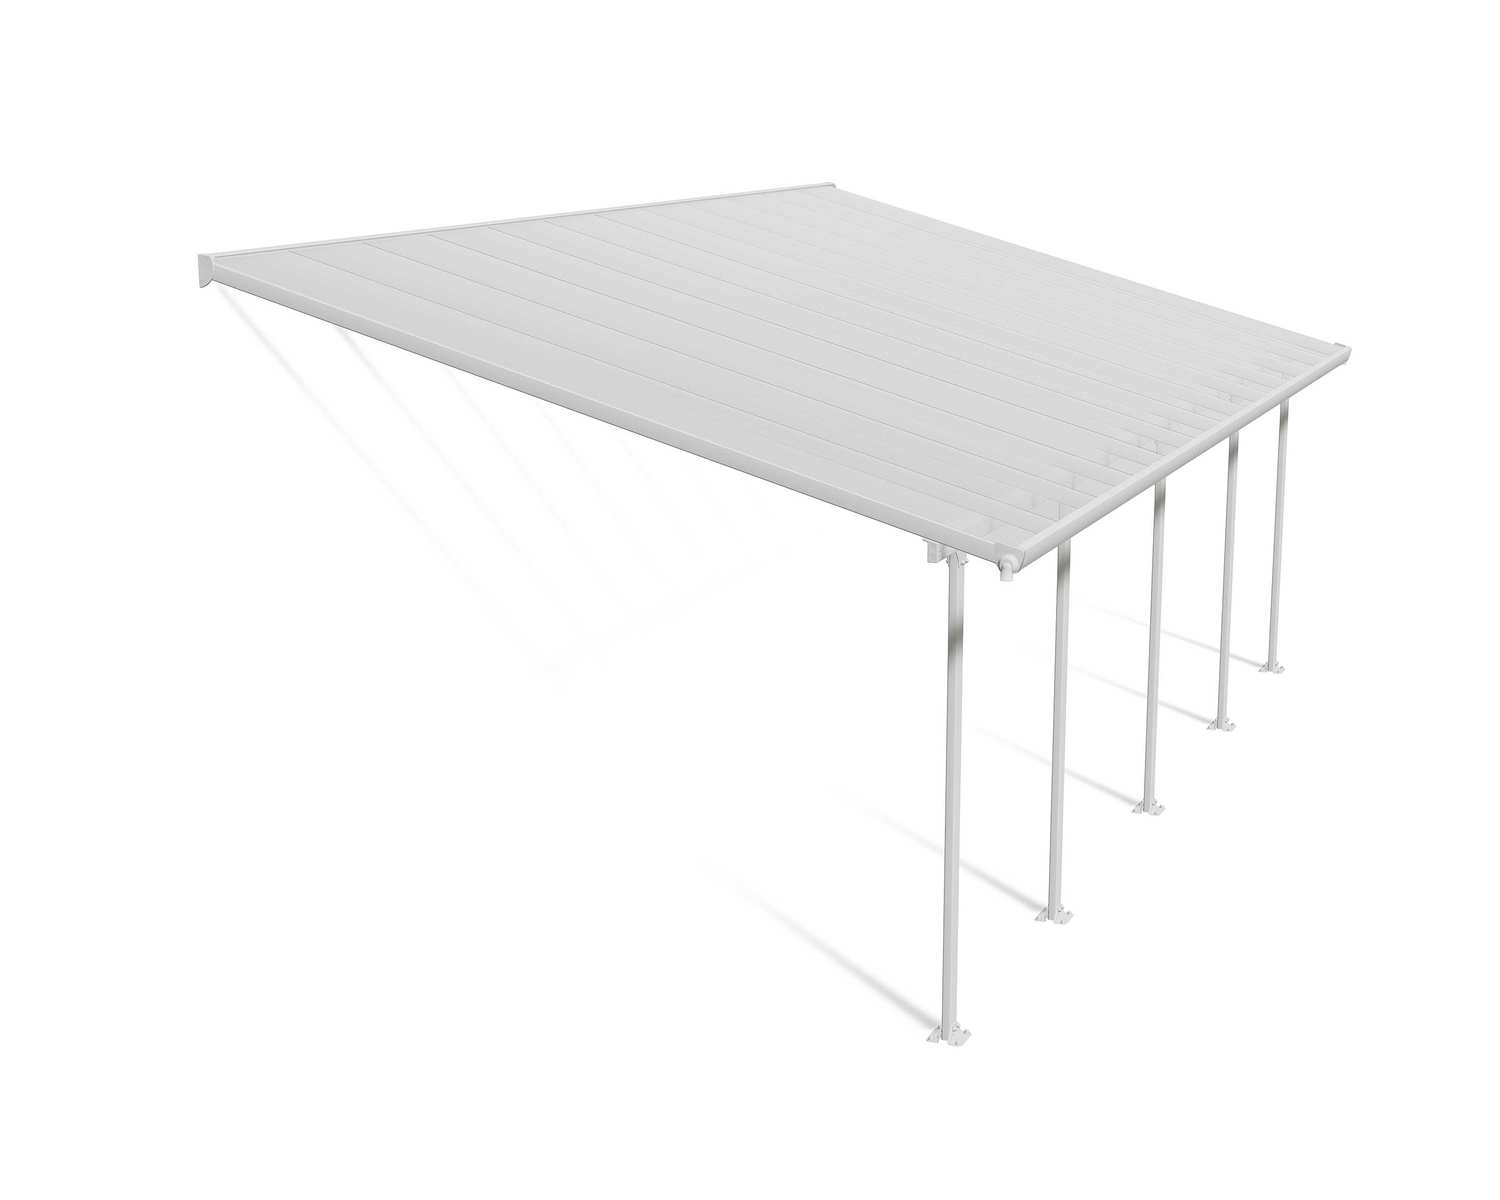 Feria 13 ft. x 26 ft. White Aluminium Patio Cover With 5 Posts, Clear Twin-Wall Polycarbonate Roof Panels.